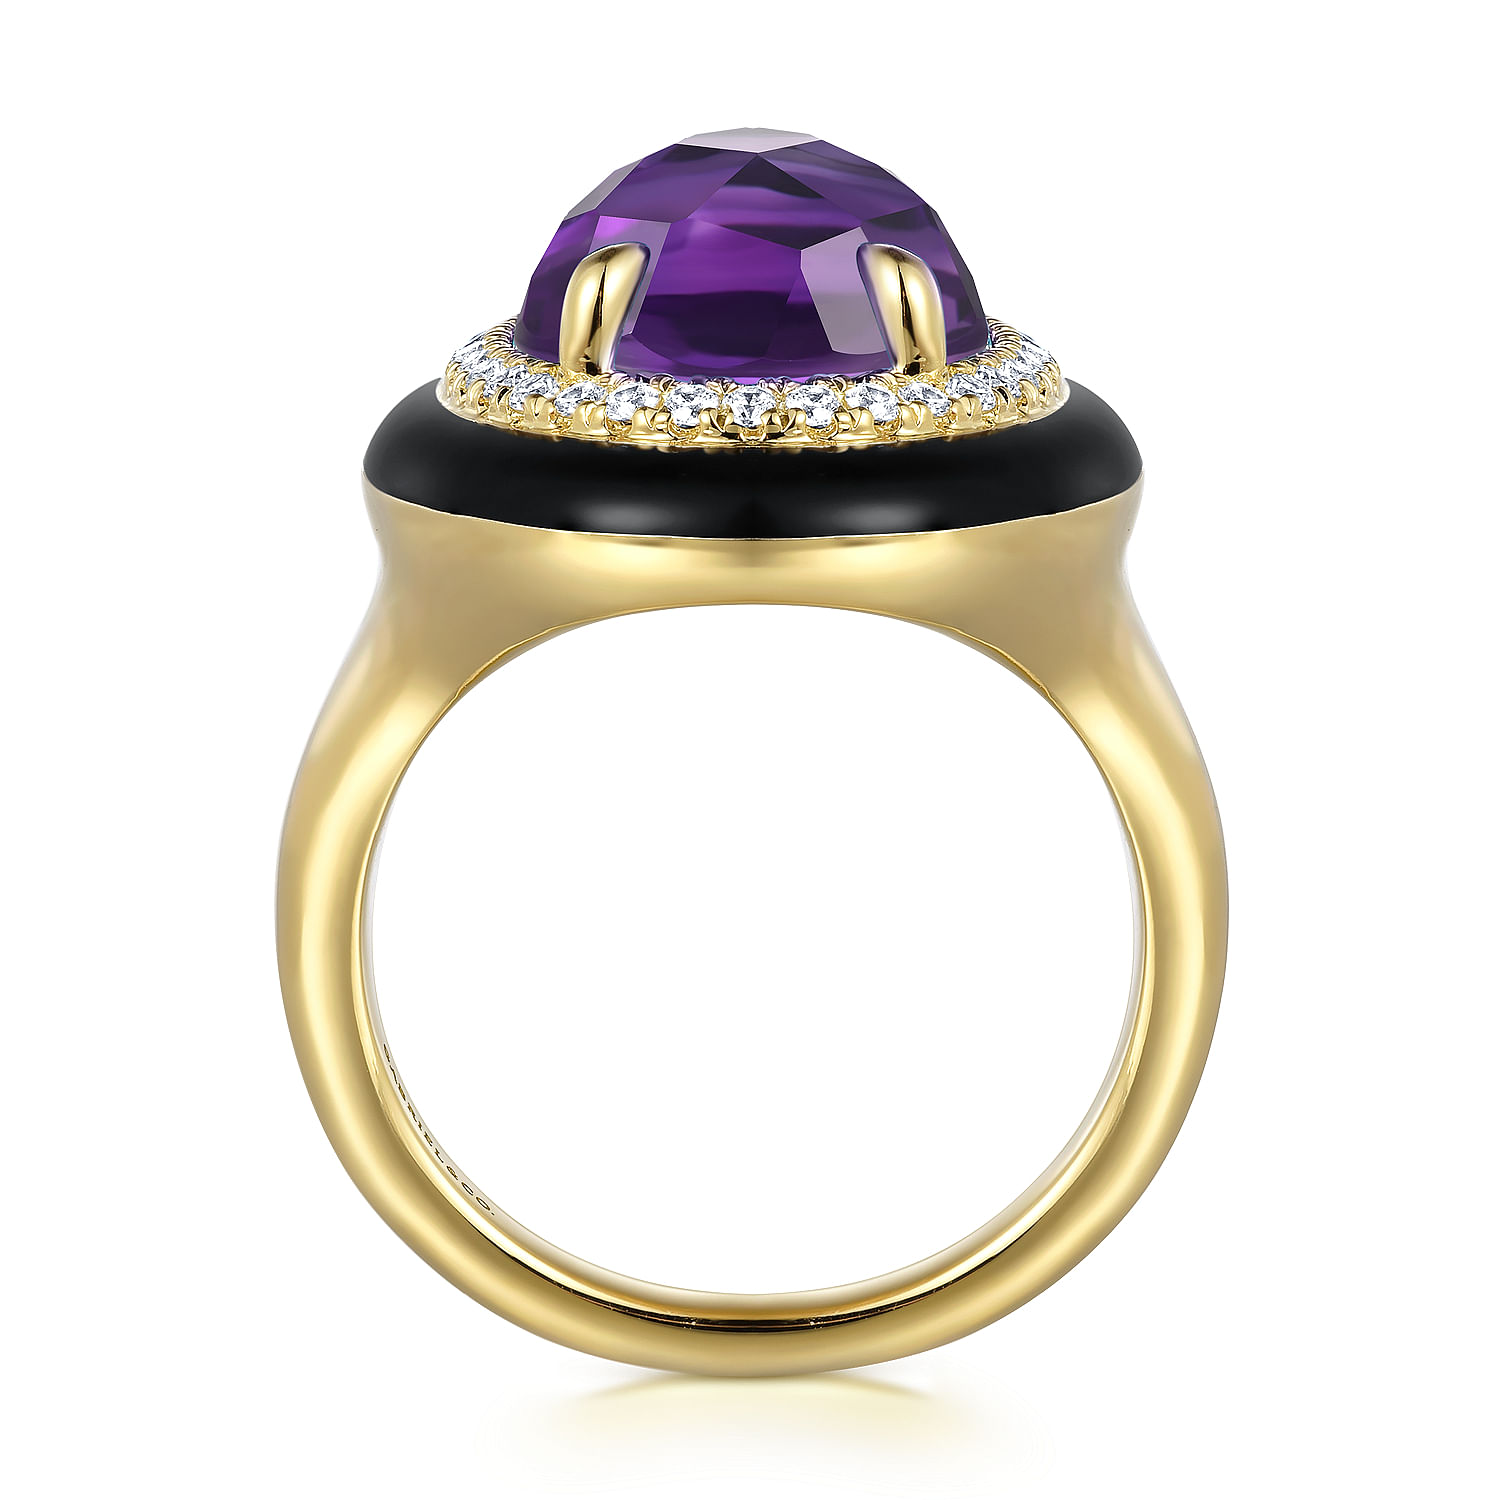 14K Yellow Gold Diamond and Oval Shape Amethyst Ladies Ring With Flower Pattern J-Back and Black Enamel